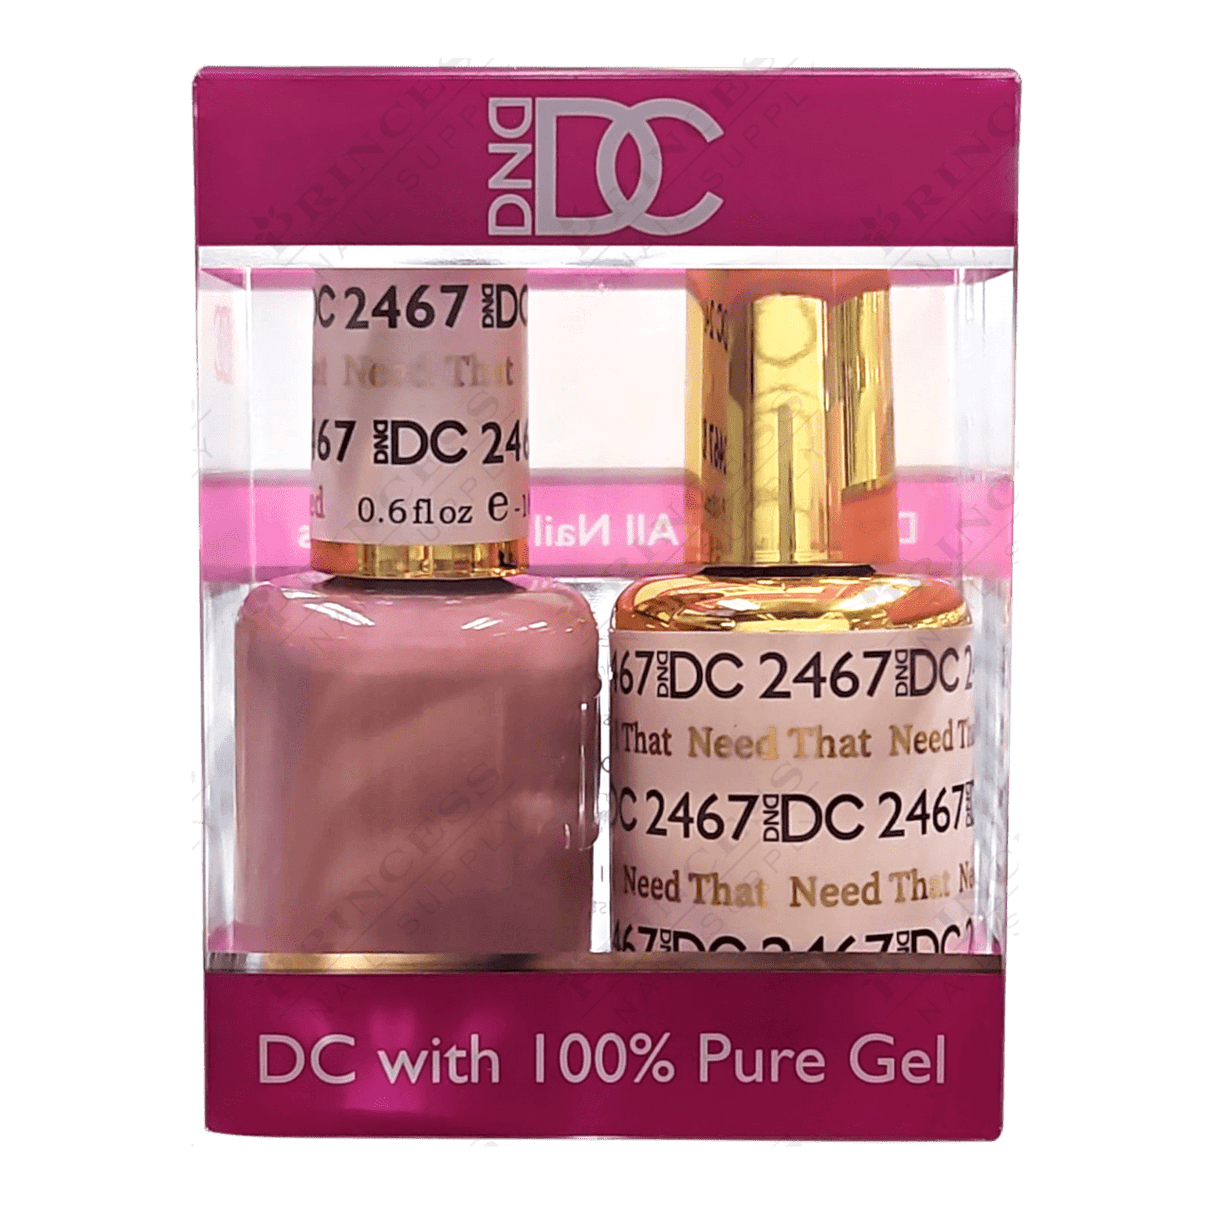 DND DC Duo Gel Matching Color 2467 Need That